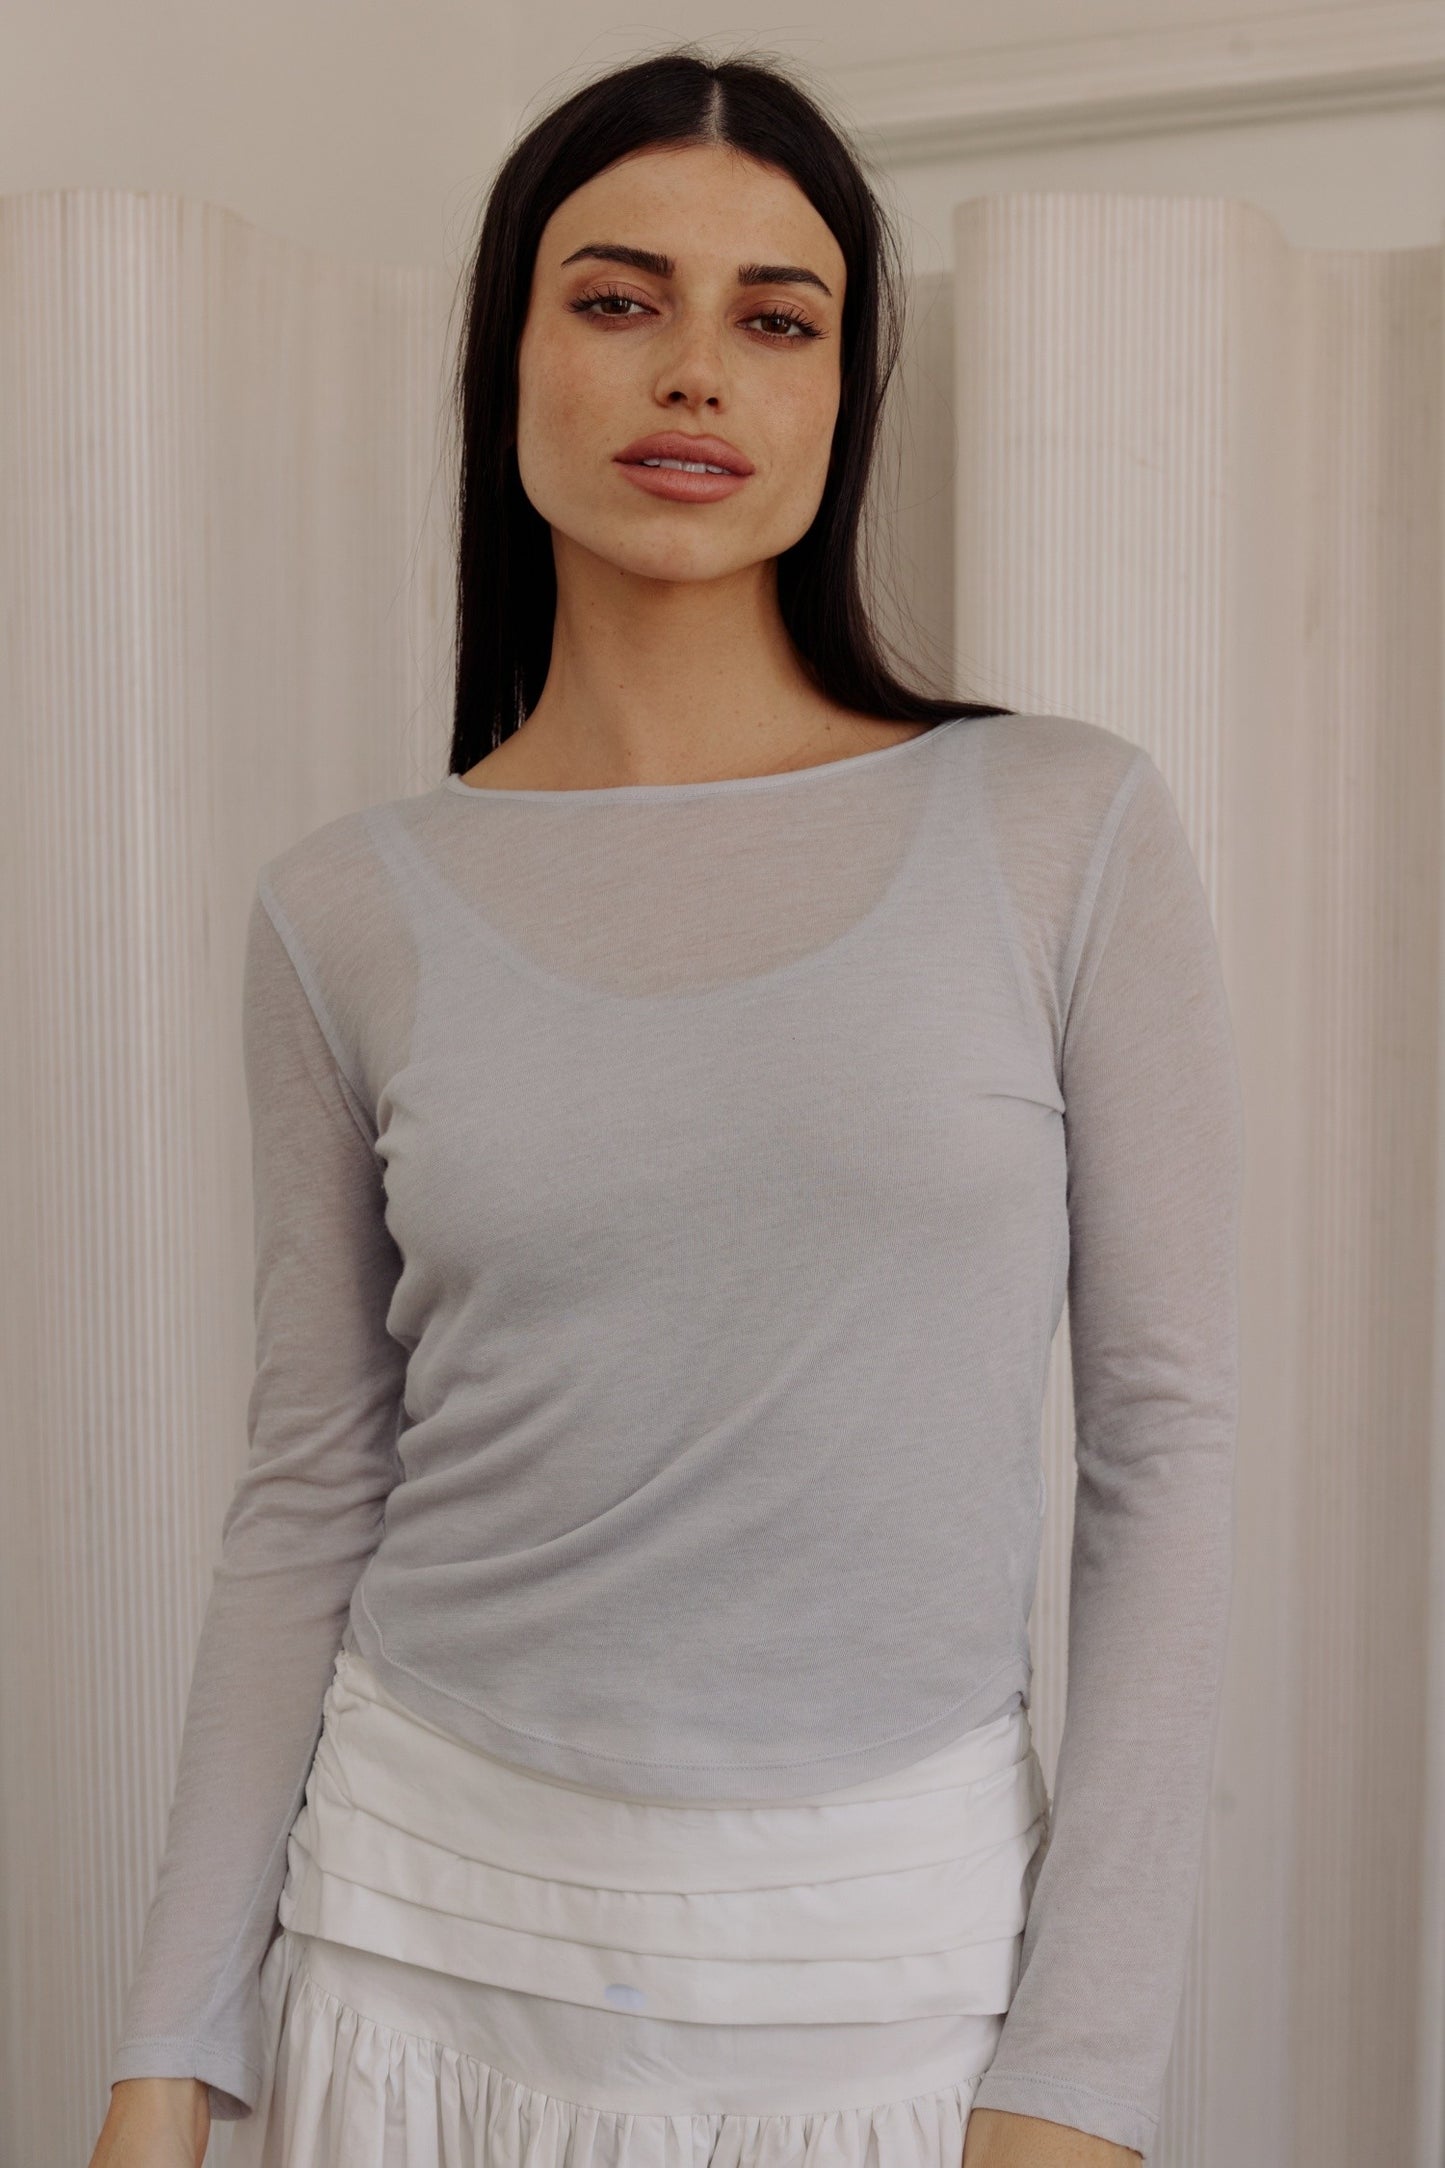 LIGHT WEIGHT SHEER CREW NECK WITH A SCOOP NECK TANK TOP